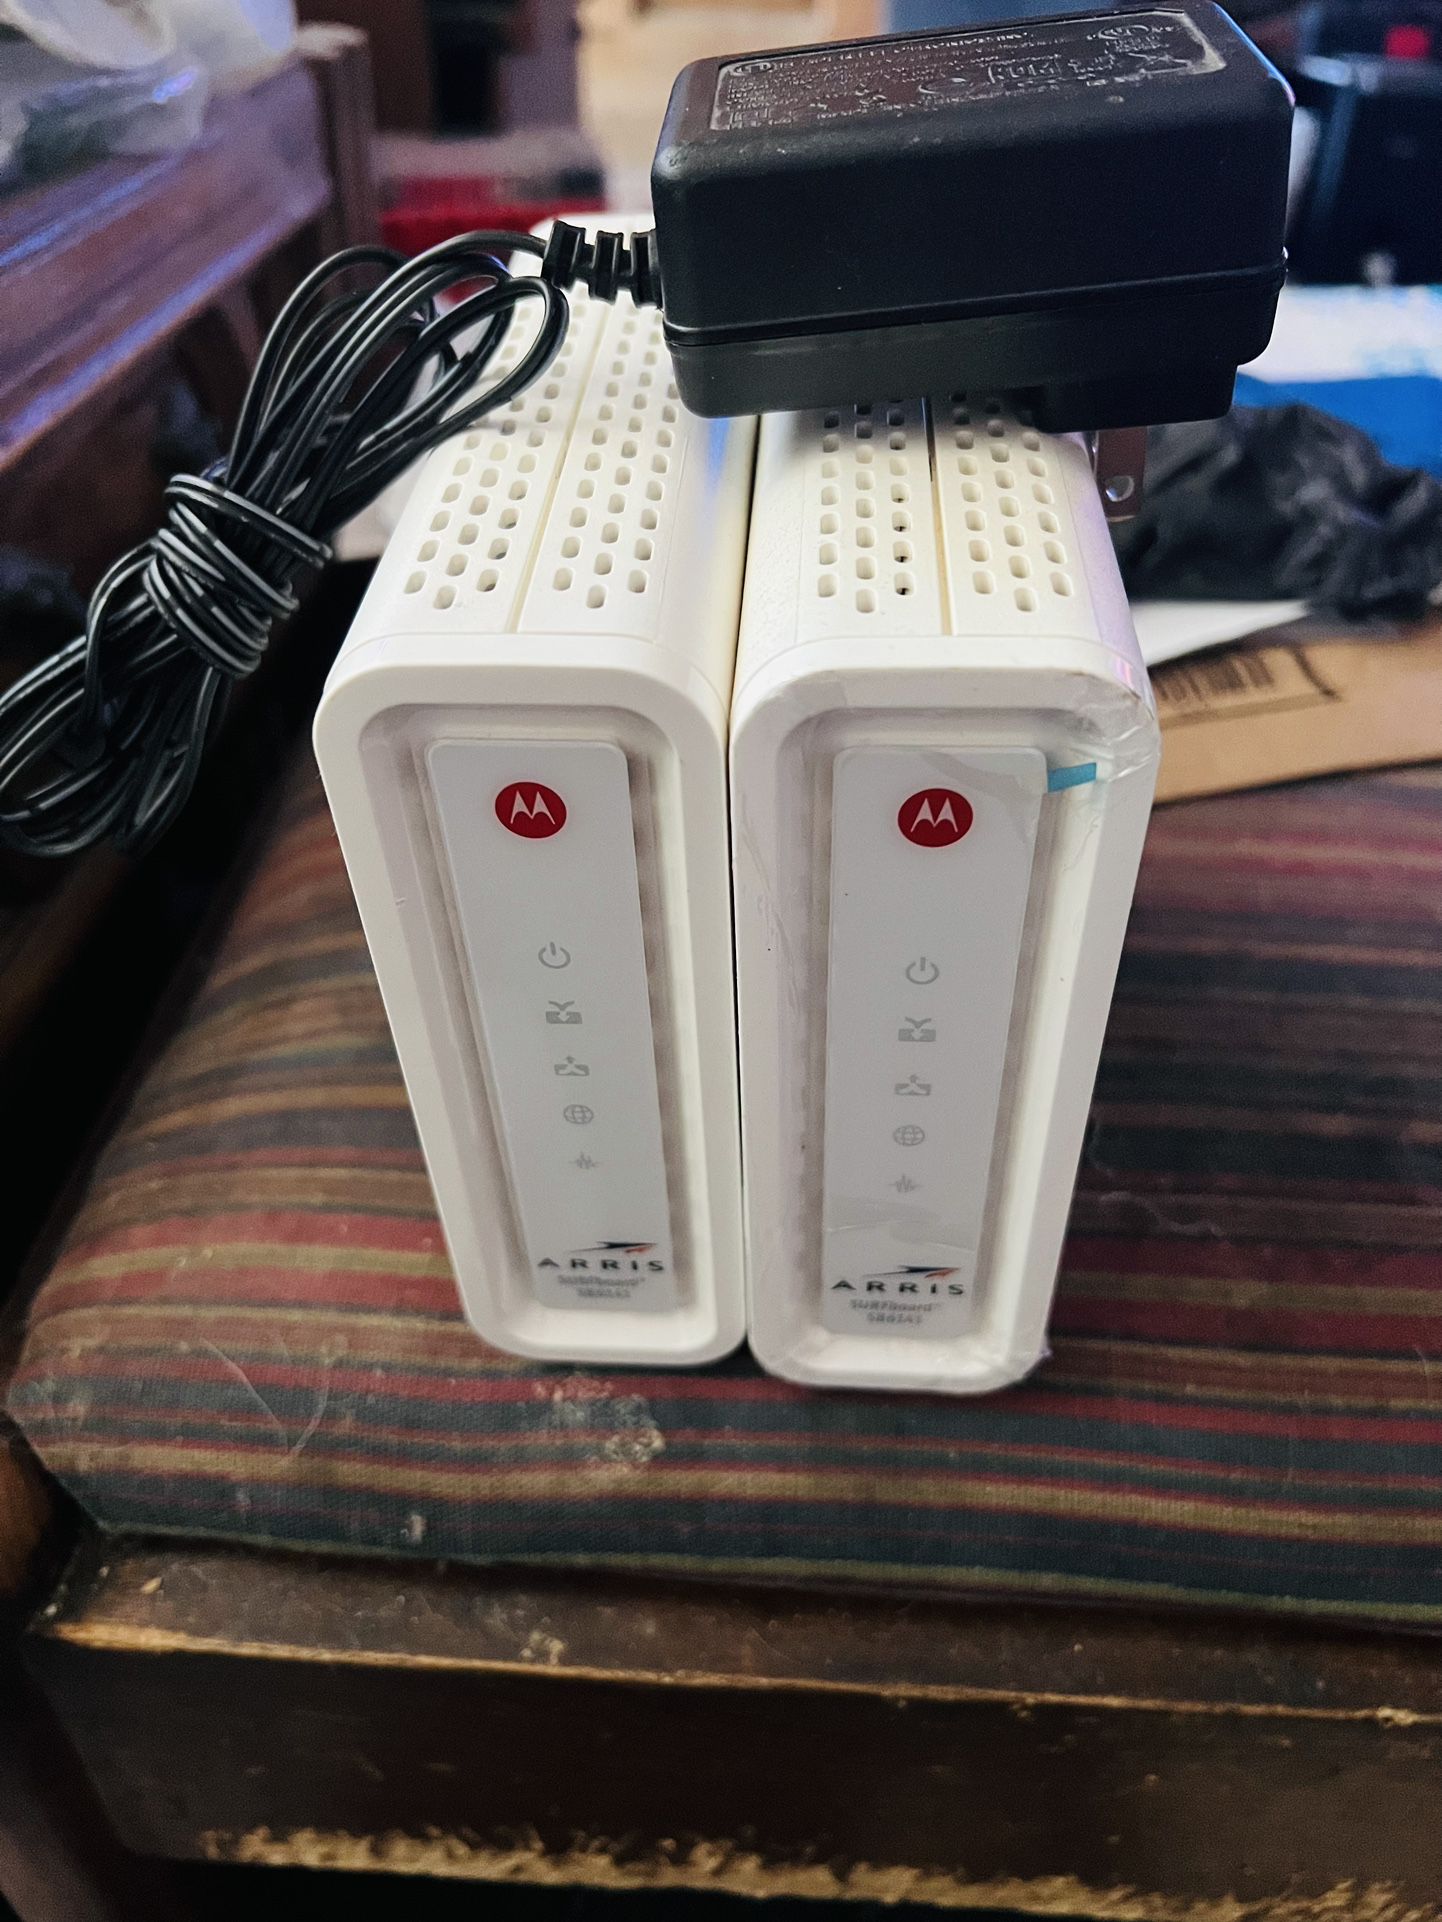 FREE !! Both Are Arris  SB6141 Cable Modems  PICKUP IN FONTANA